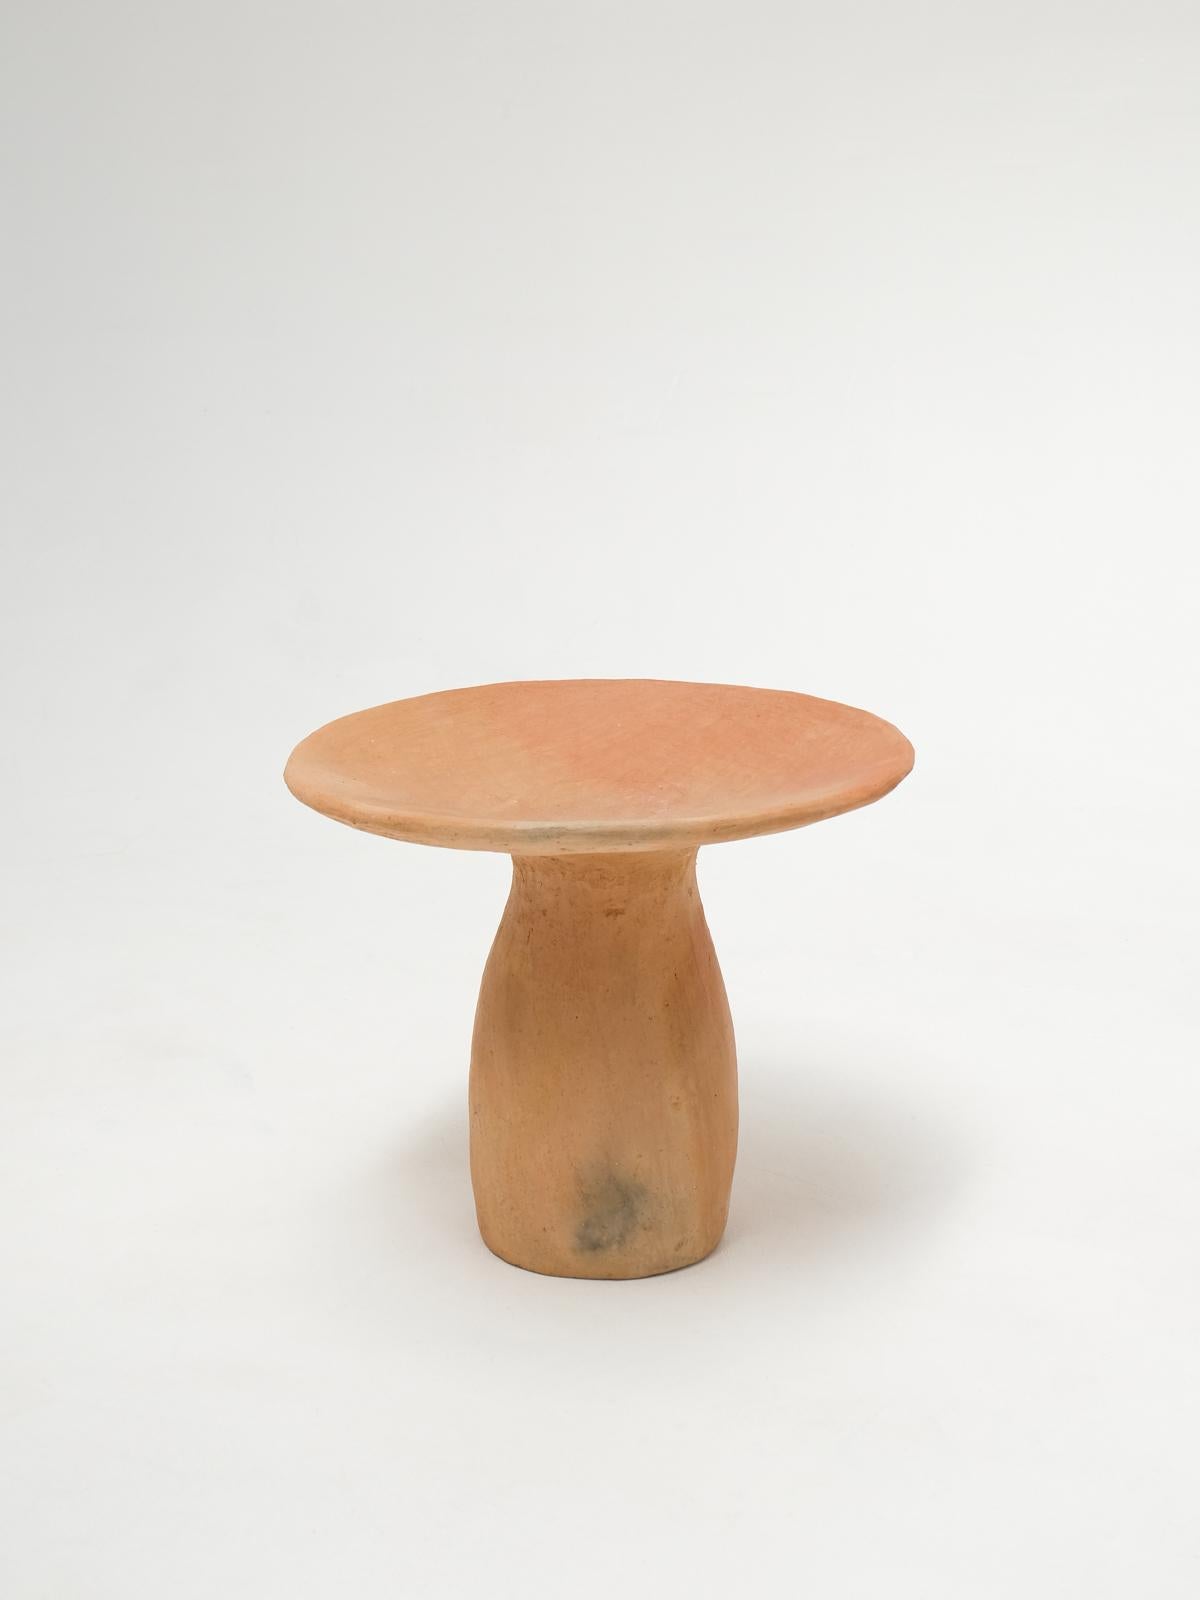 Terracotta contemporary Side Tables Made of local Clay, Handbuilt handfired For Sale 6